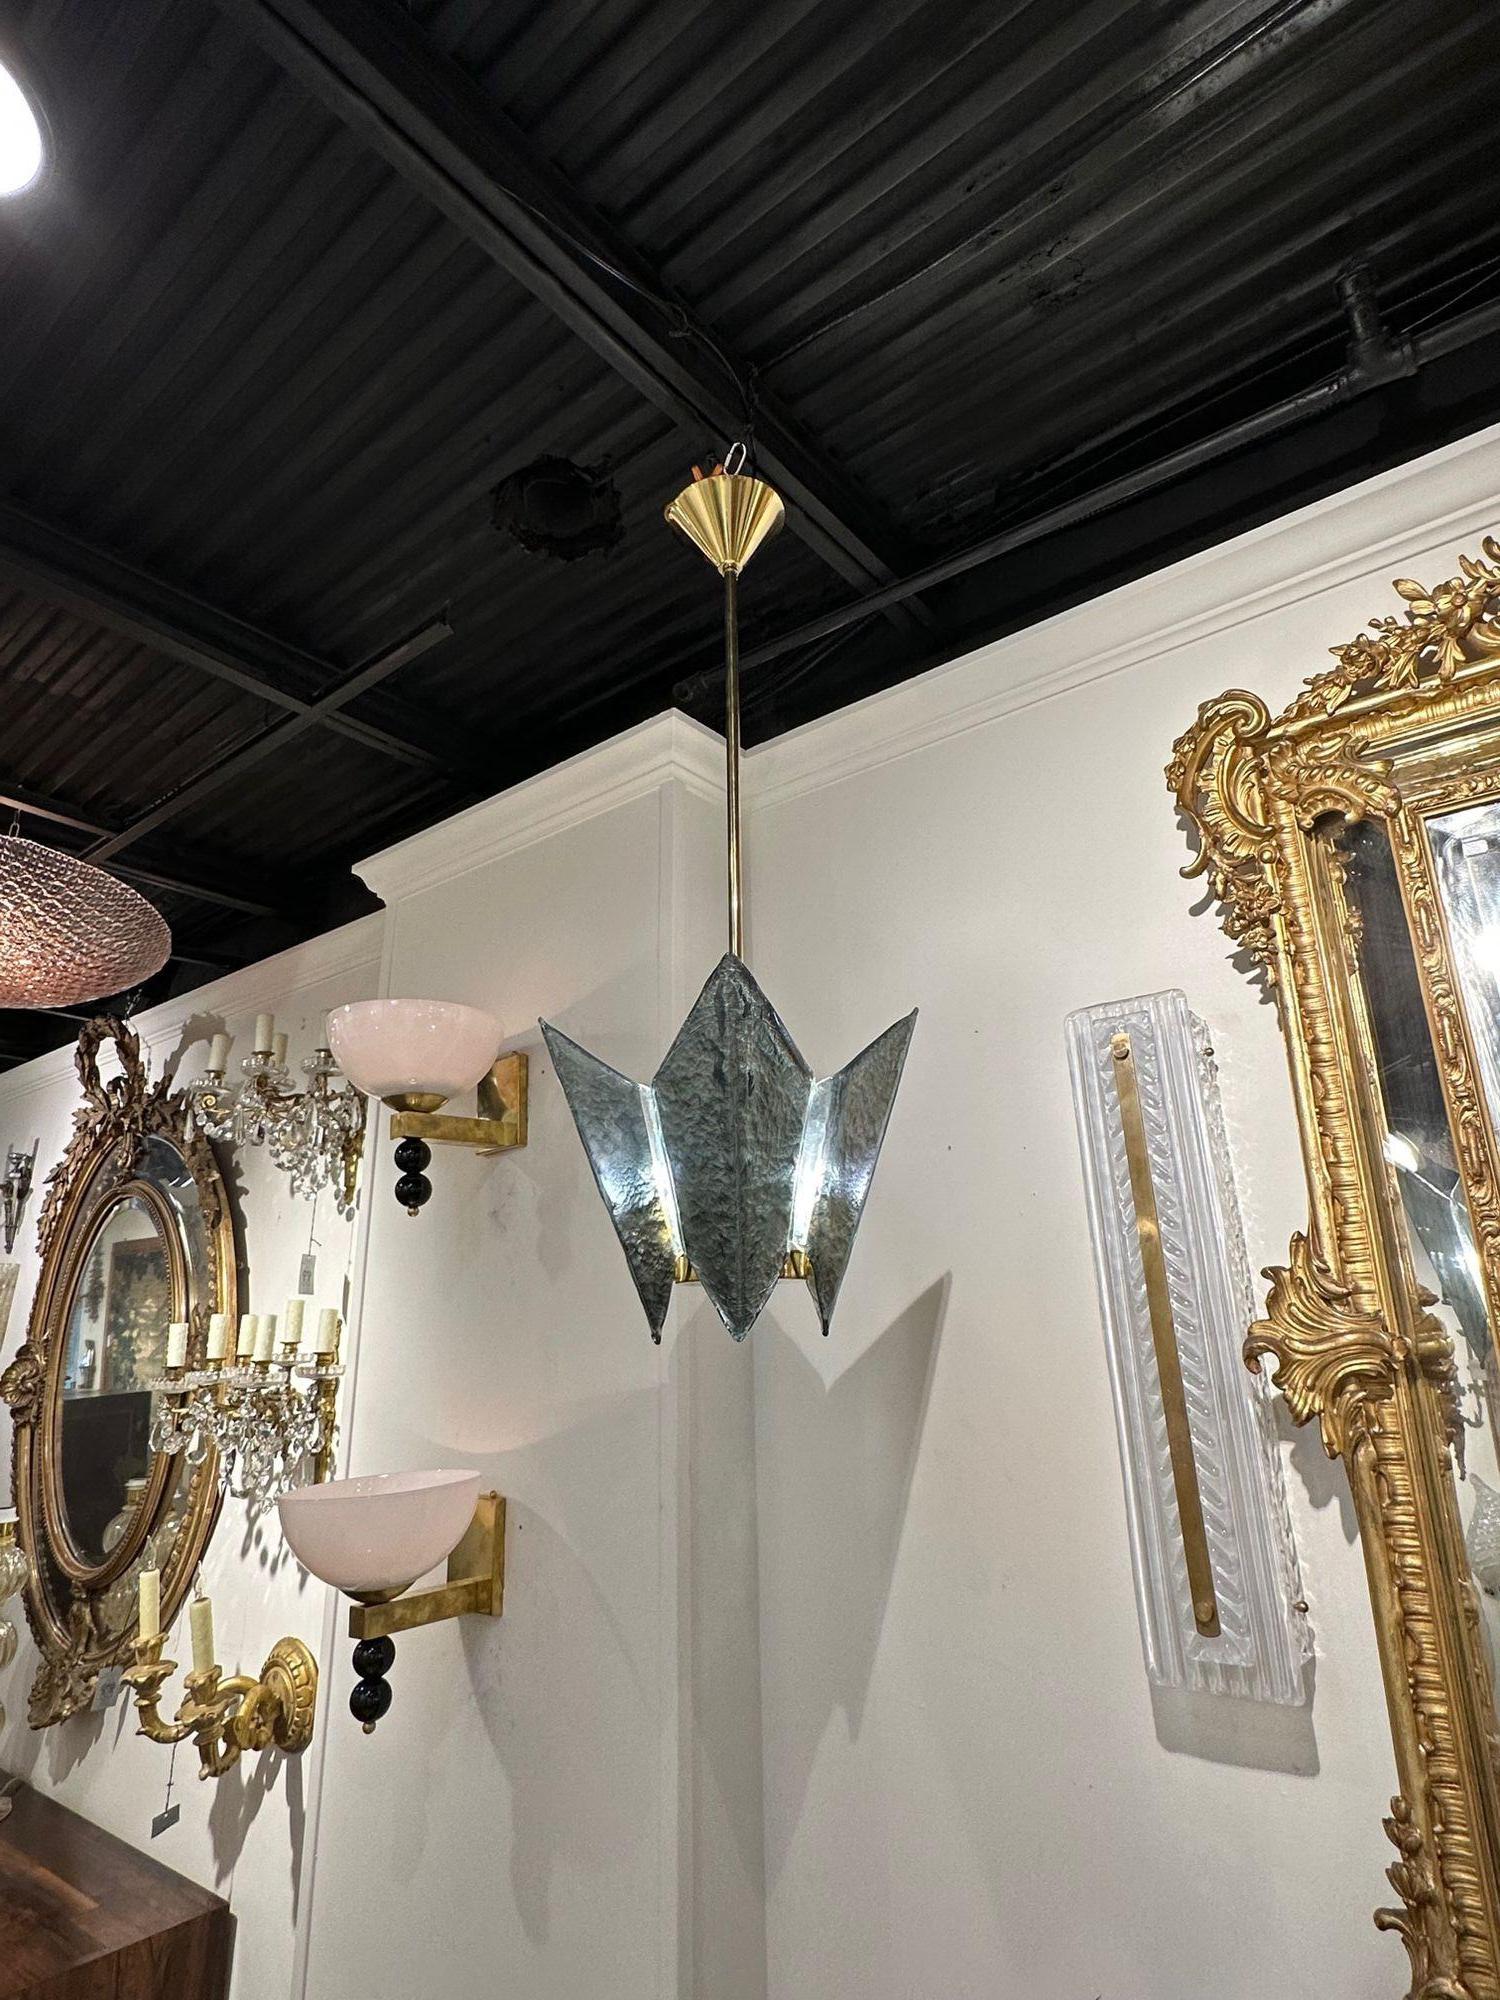 Modern Murano glass and brass pendant light in Fontana green. The chandelier has been professionally re-wired, cleaned and is ready to hang. Includes matching chain and canopy. This is available for custom orders in quantity and colors.